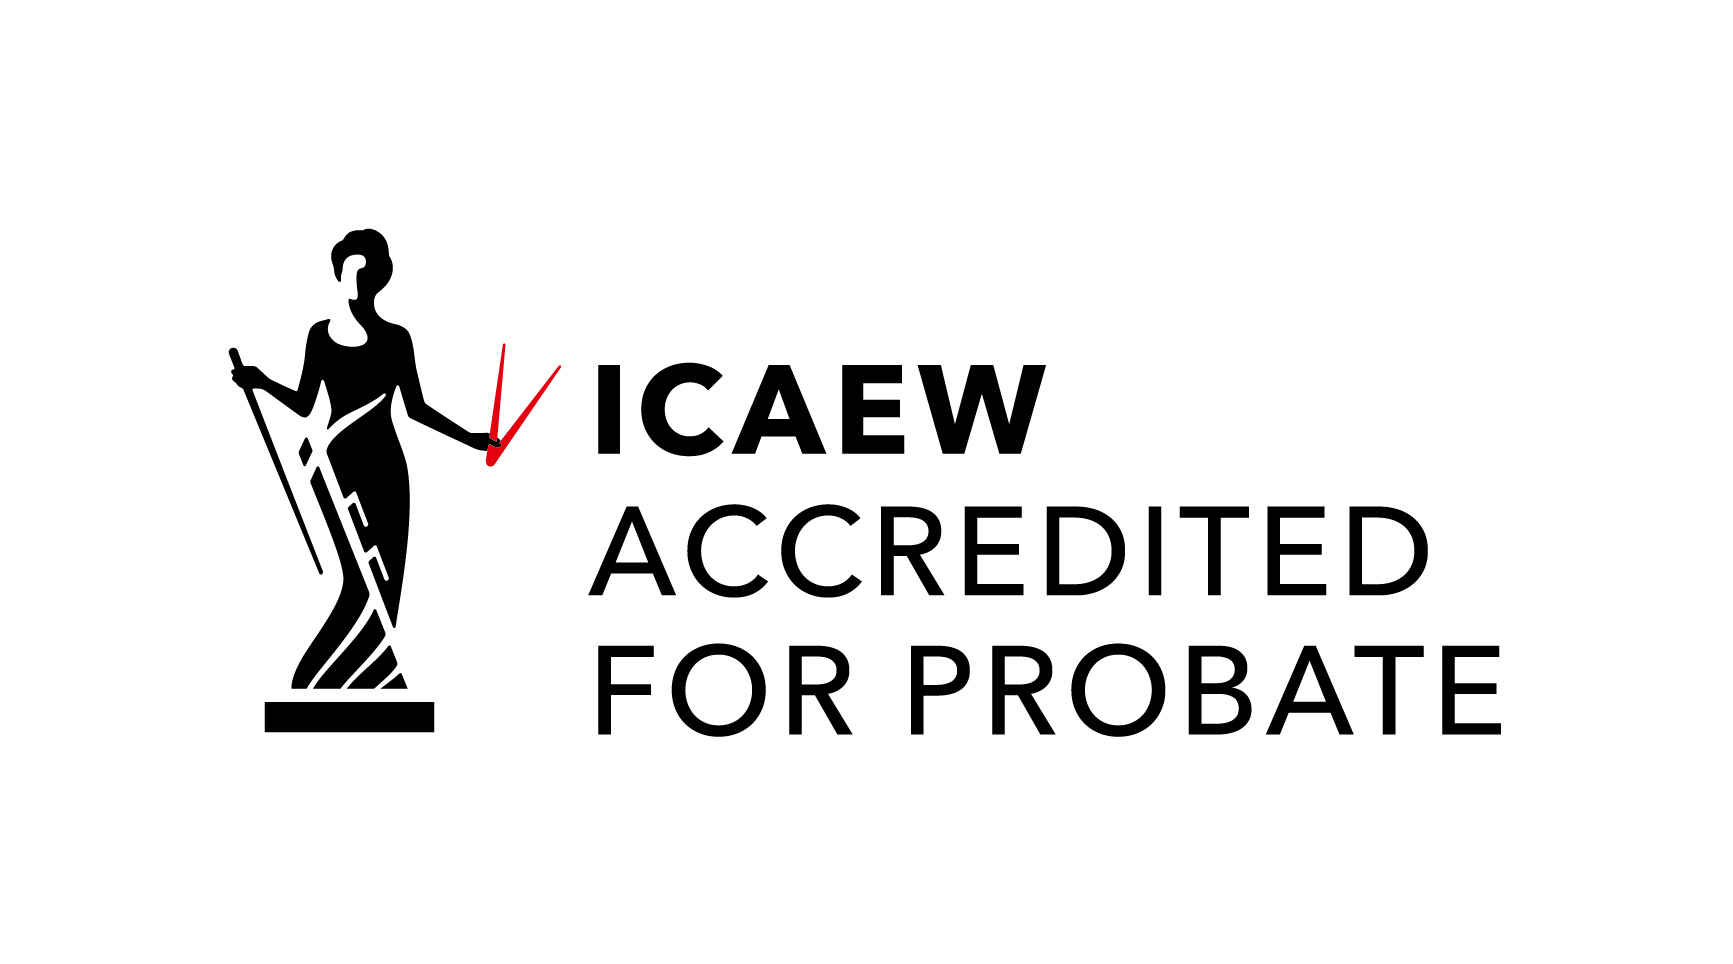 ICAEW Accredited for Probate BLK